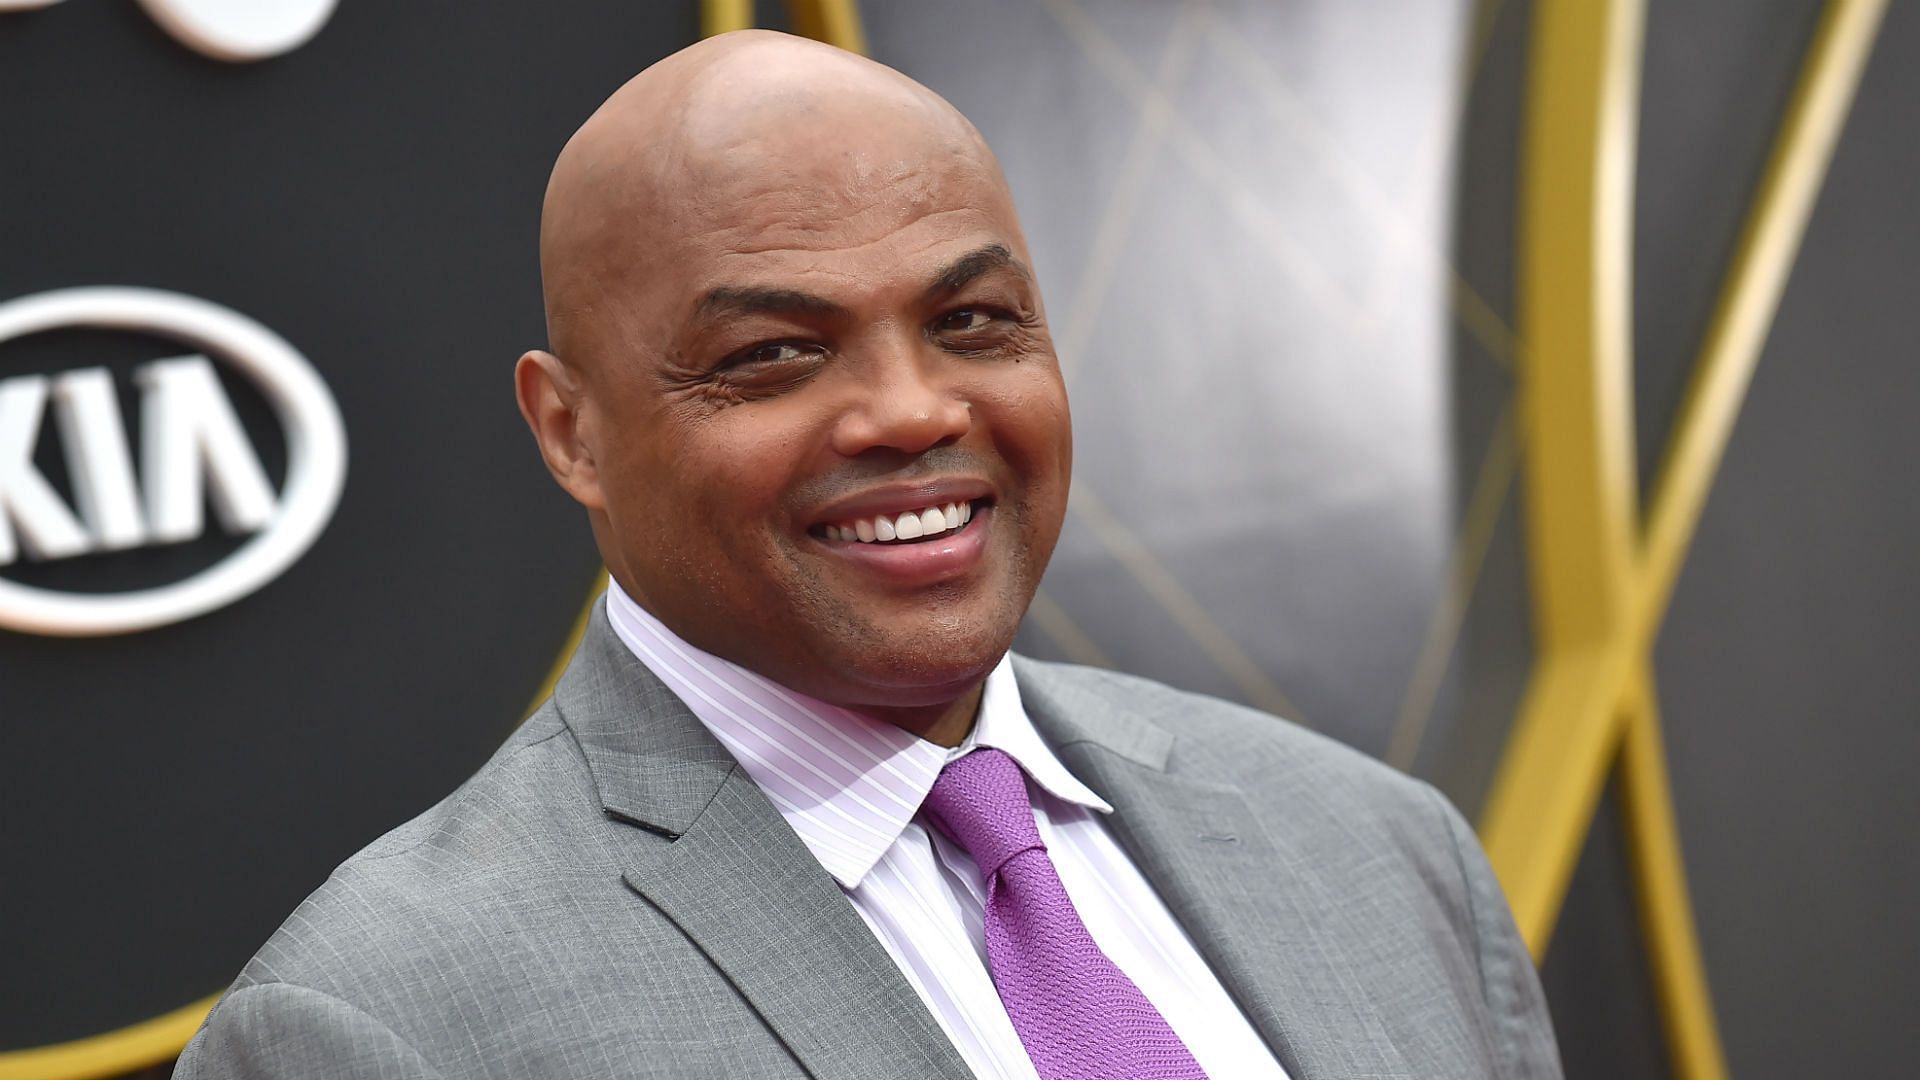 Charles Barkley continued his antics on Inside the NBA [Source: Sporting News]